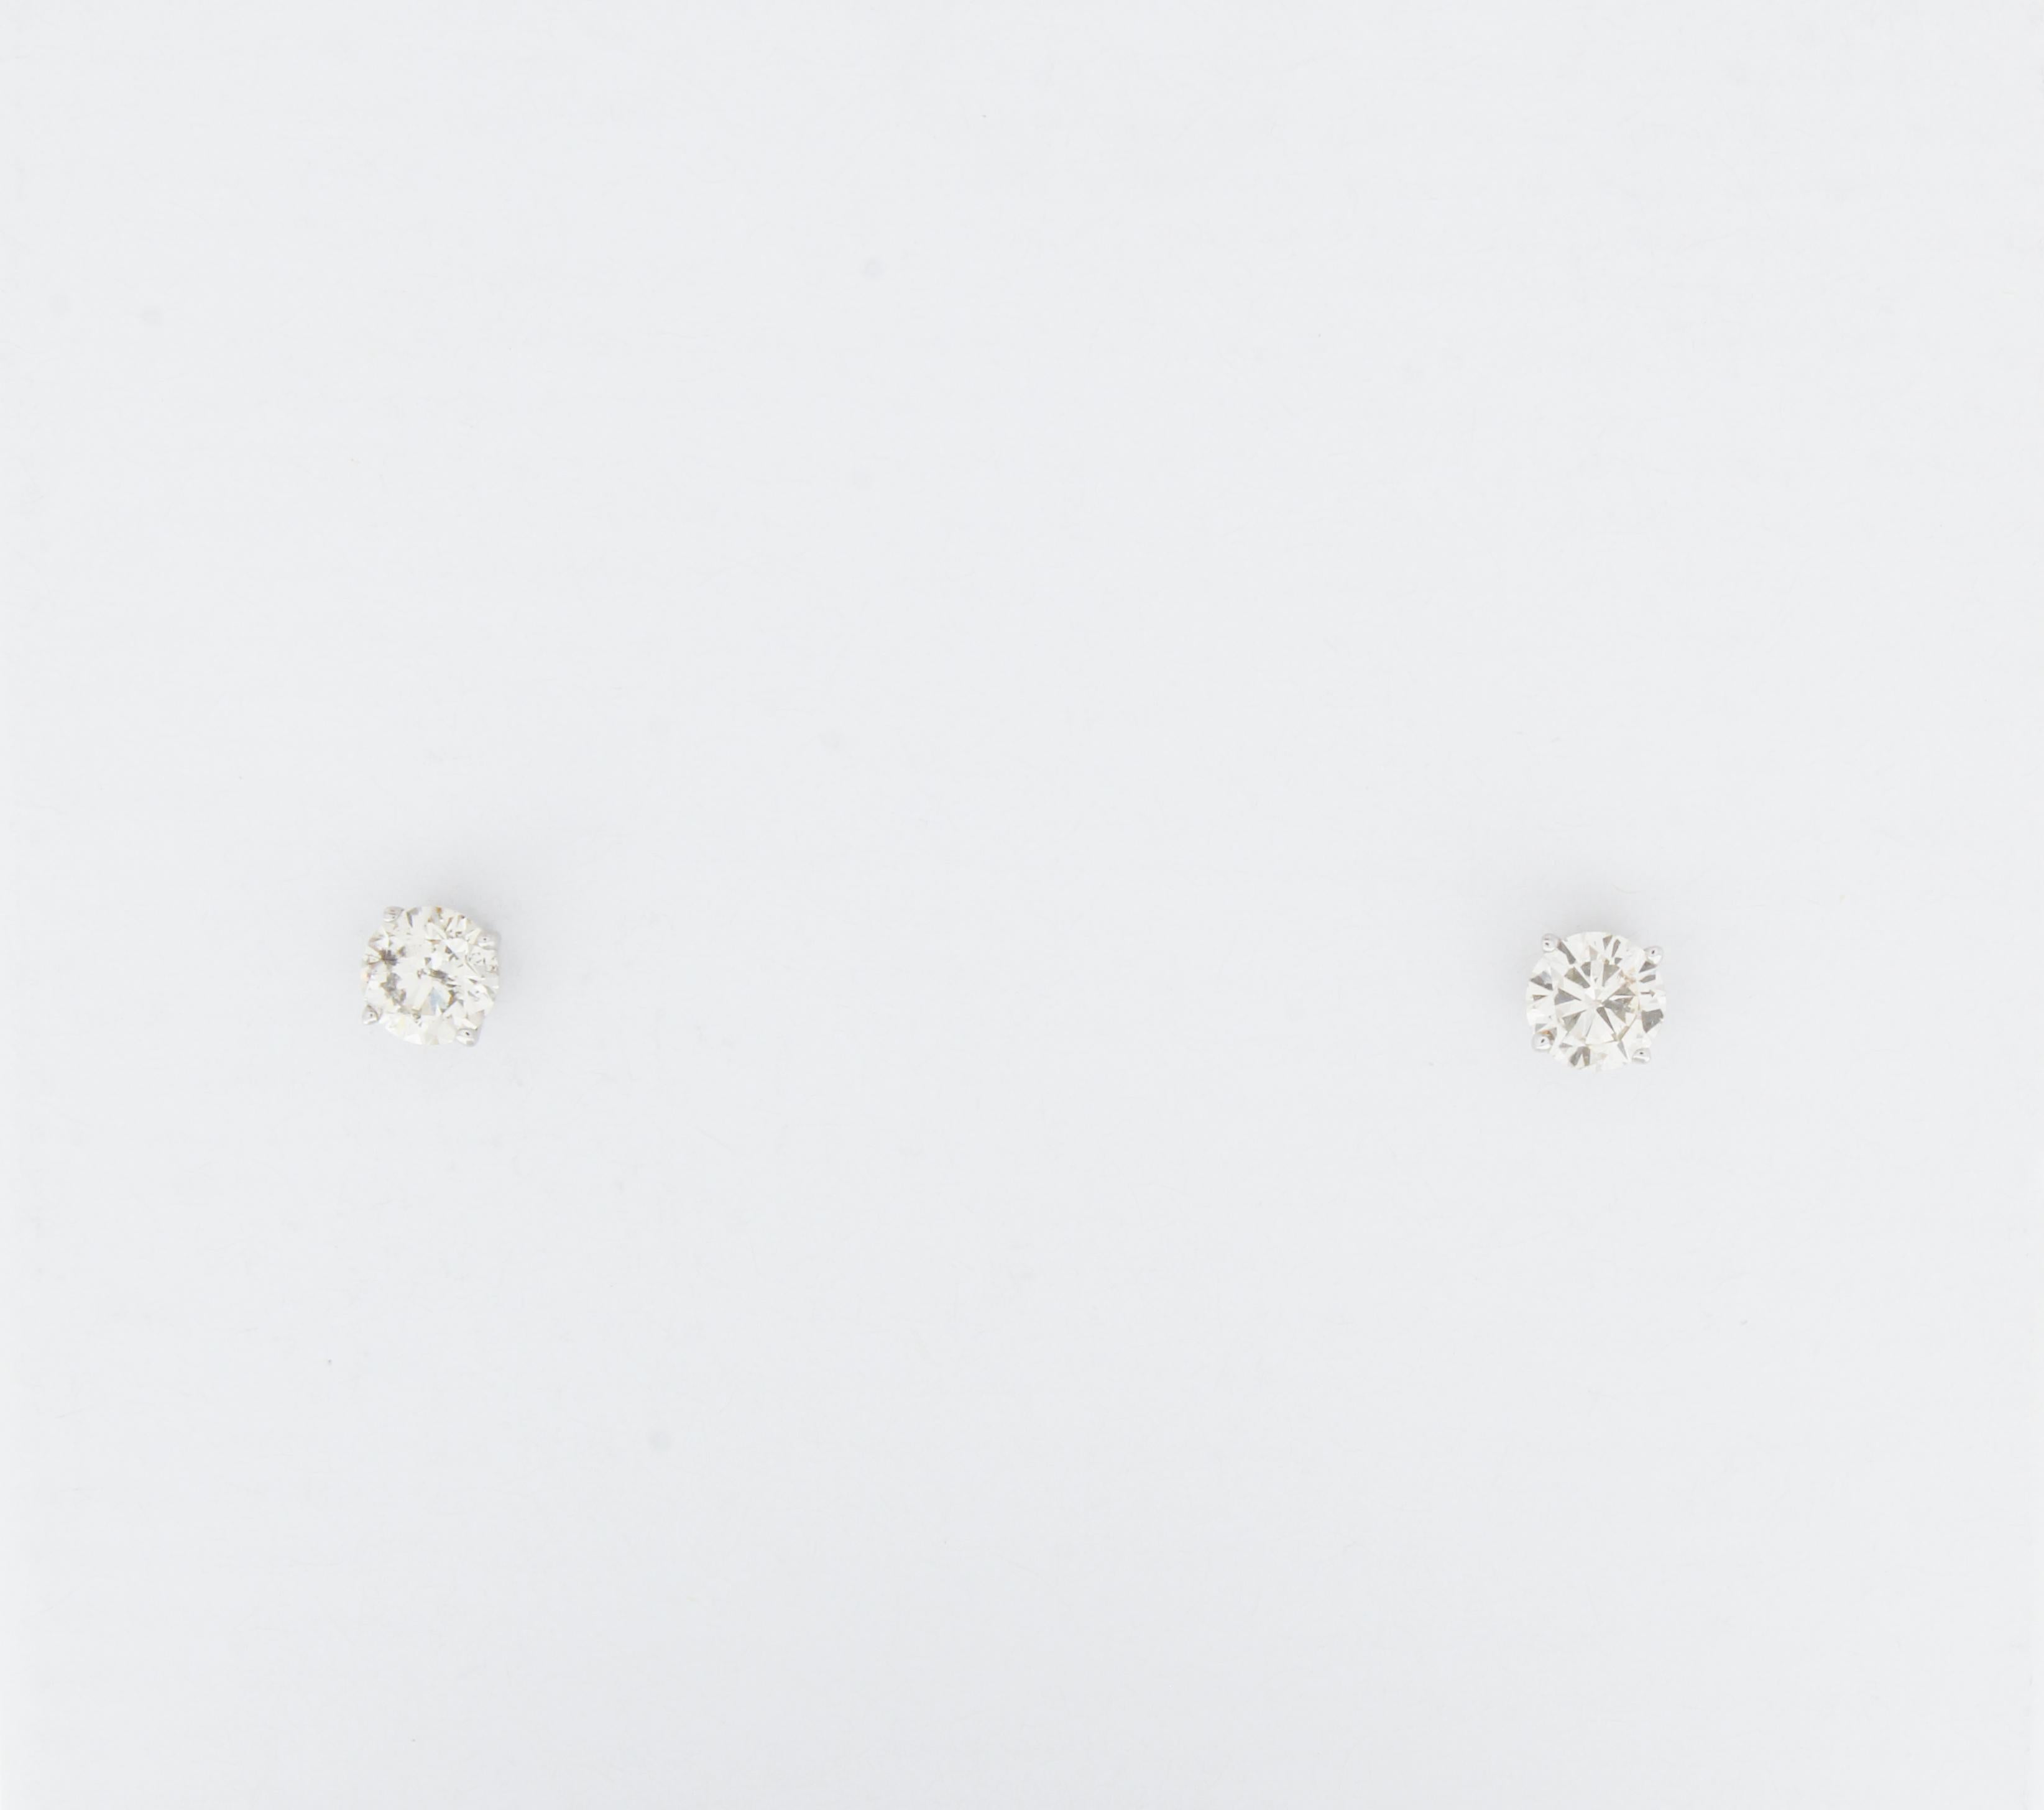 Contemporary 0.33 Carat Total Weight Diamond Four Prong Stud Earrings in 14k White Gold For Sale